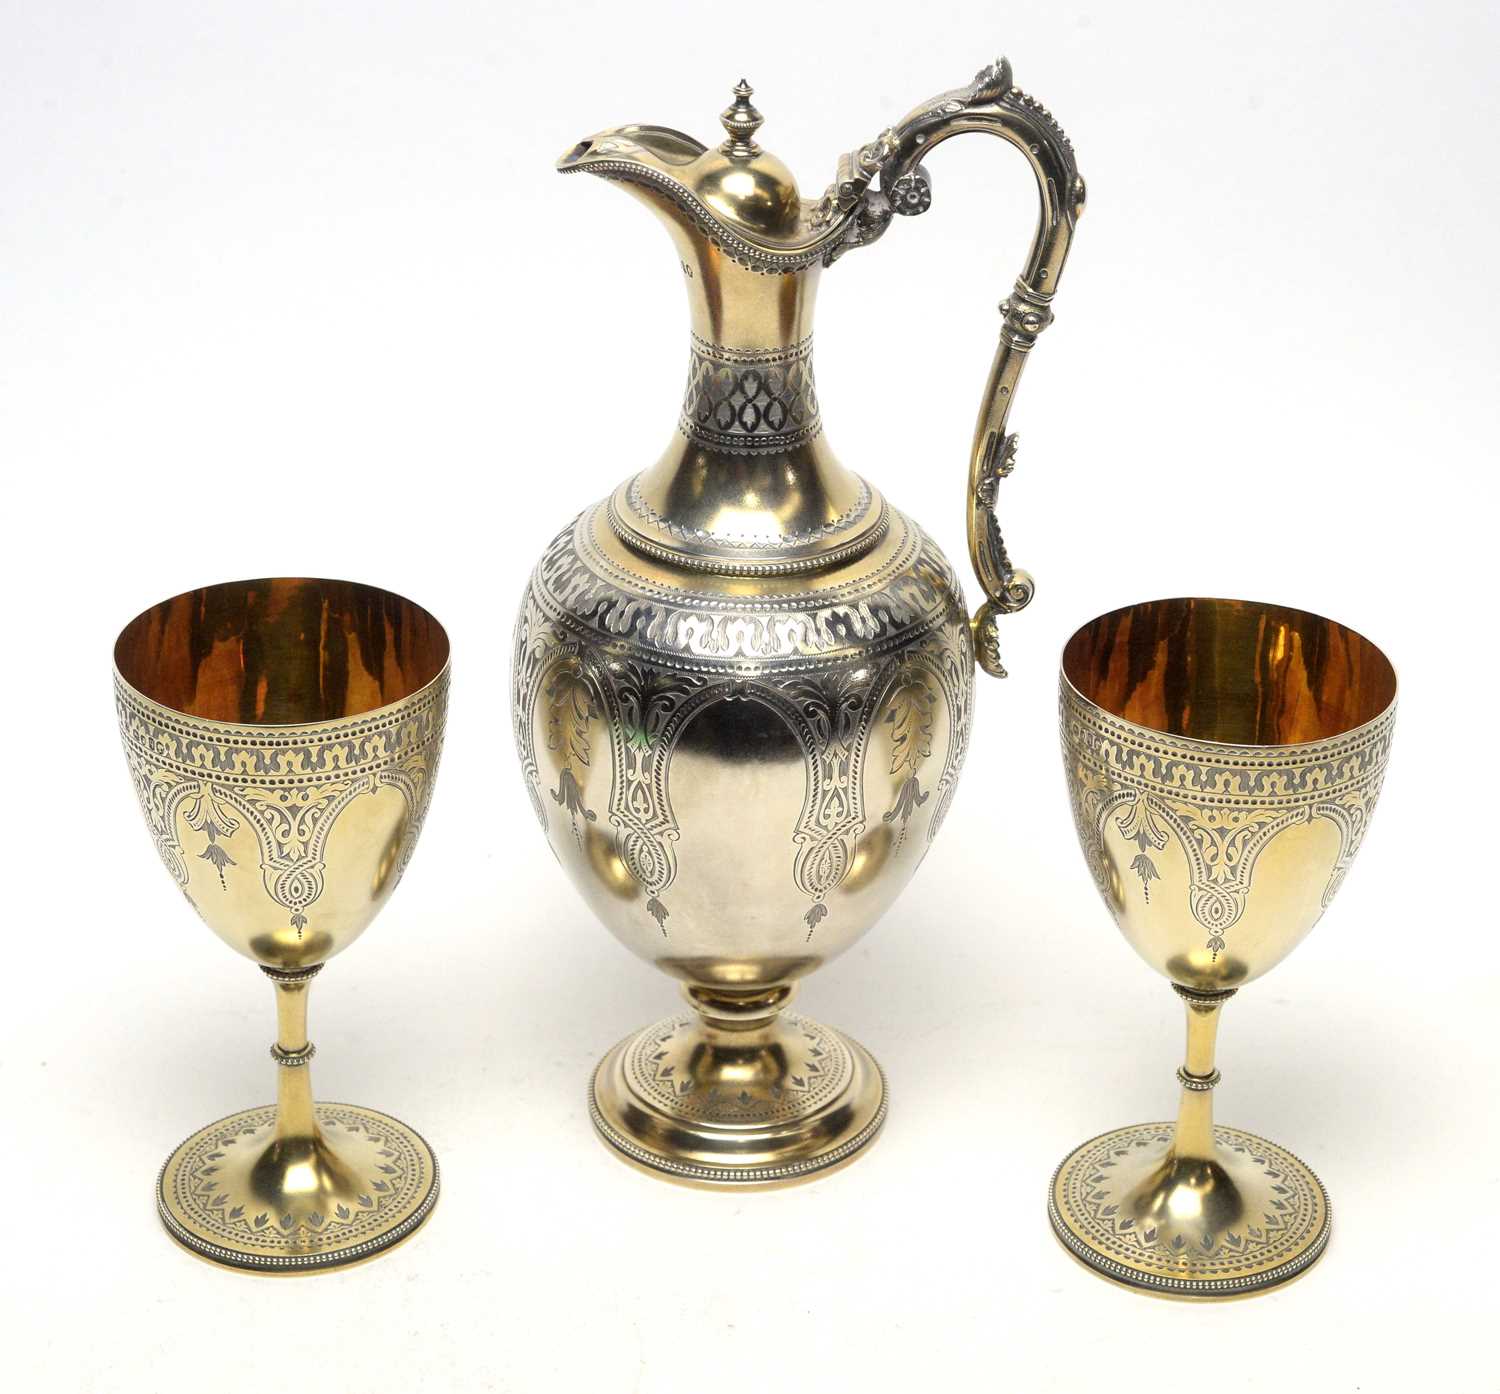 594 - A fine Victorian silver claret jug and two matching chalices, by Martin Hall & Co,